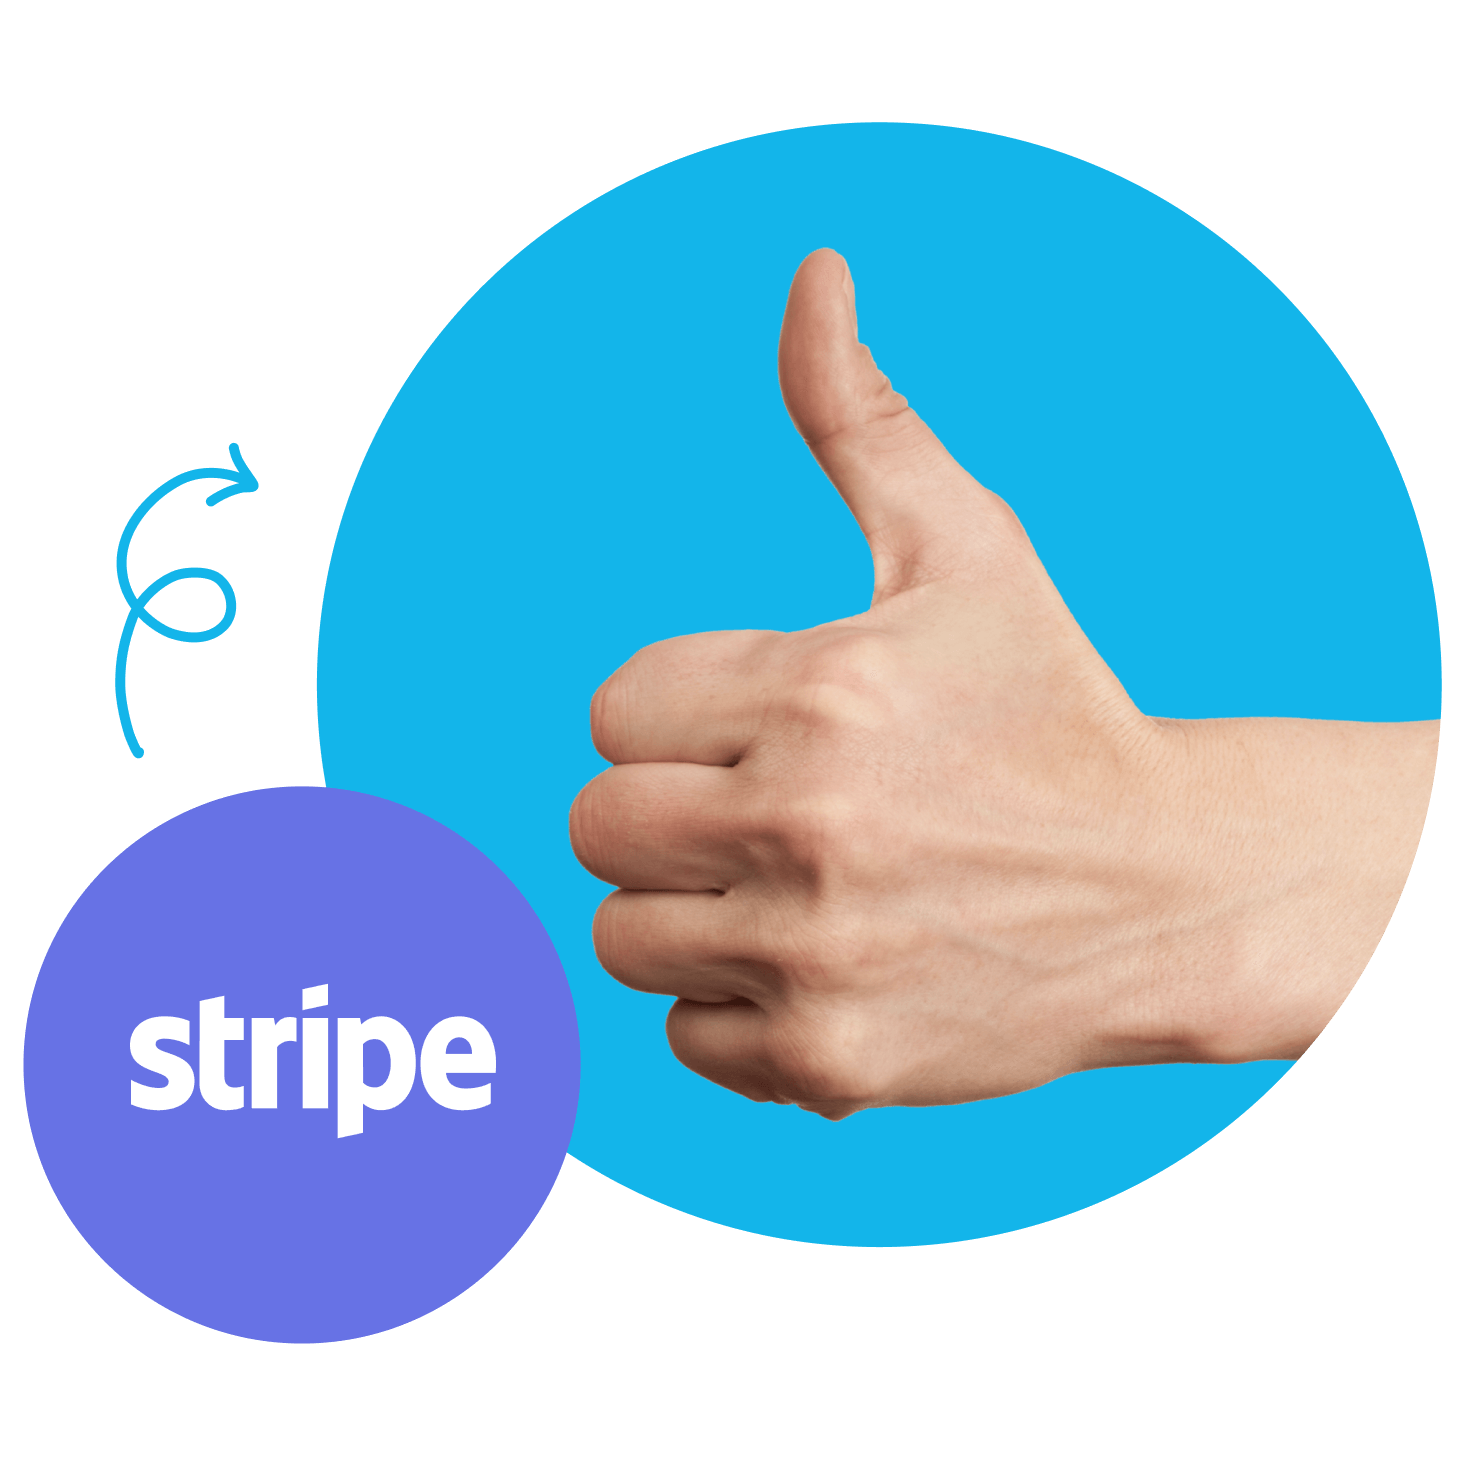 The Stripe logo and a thumbs-up sign represent Stripe’s ability to let customers pay online, instantly.